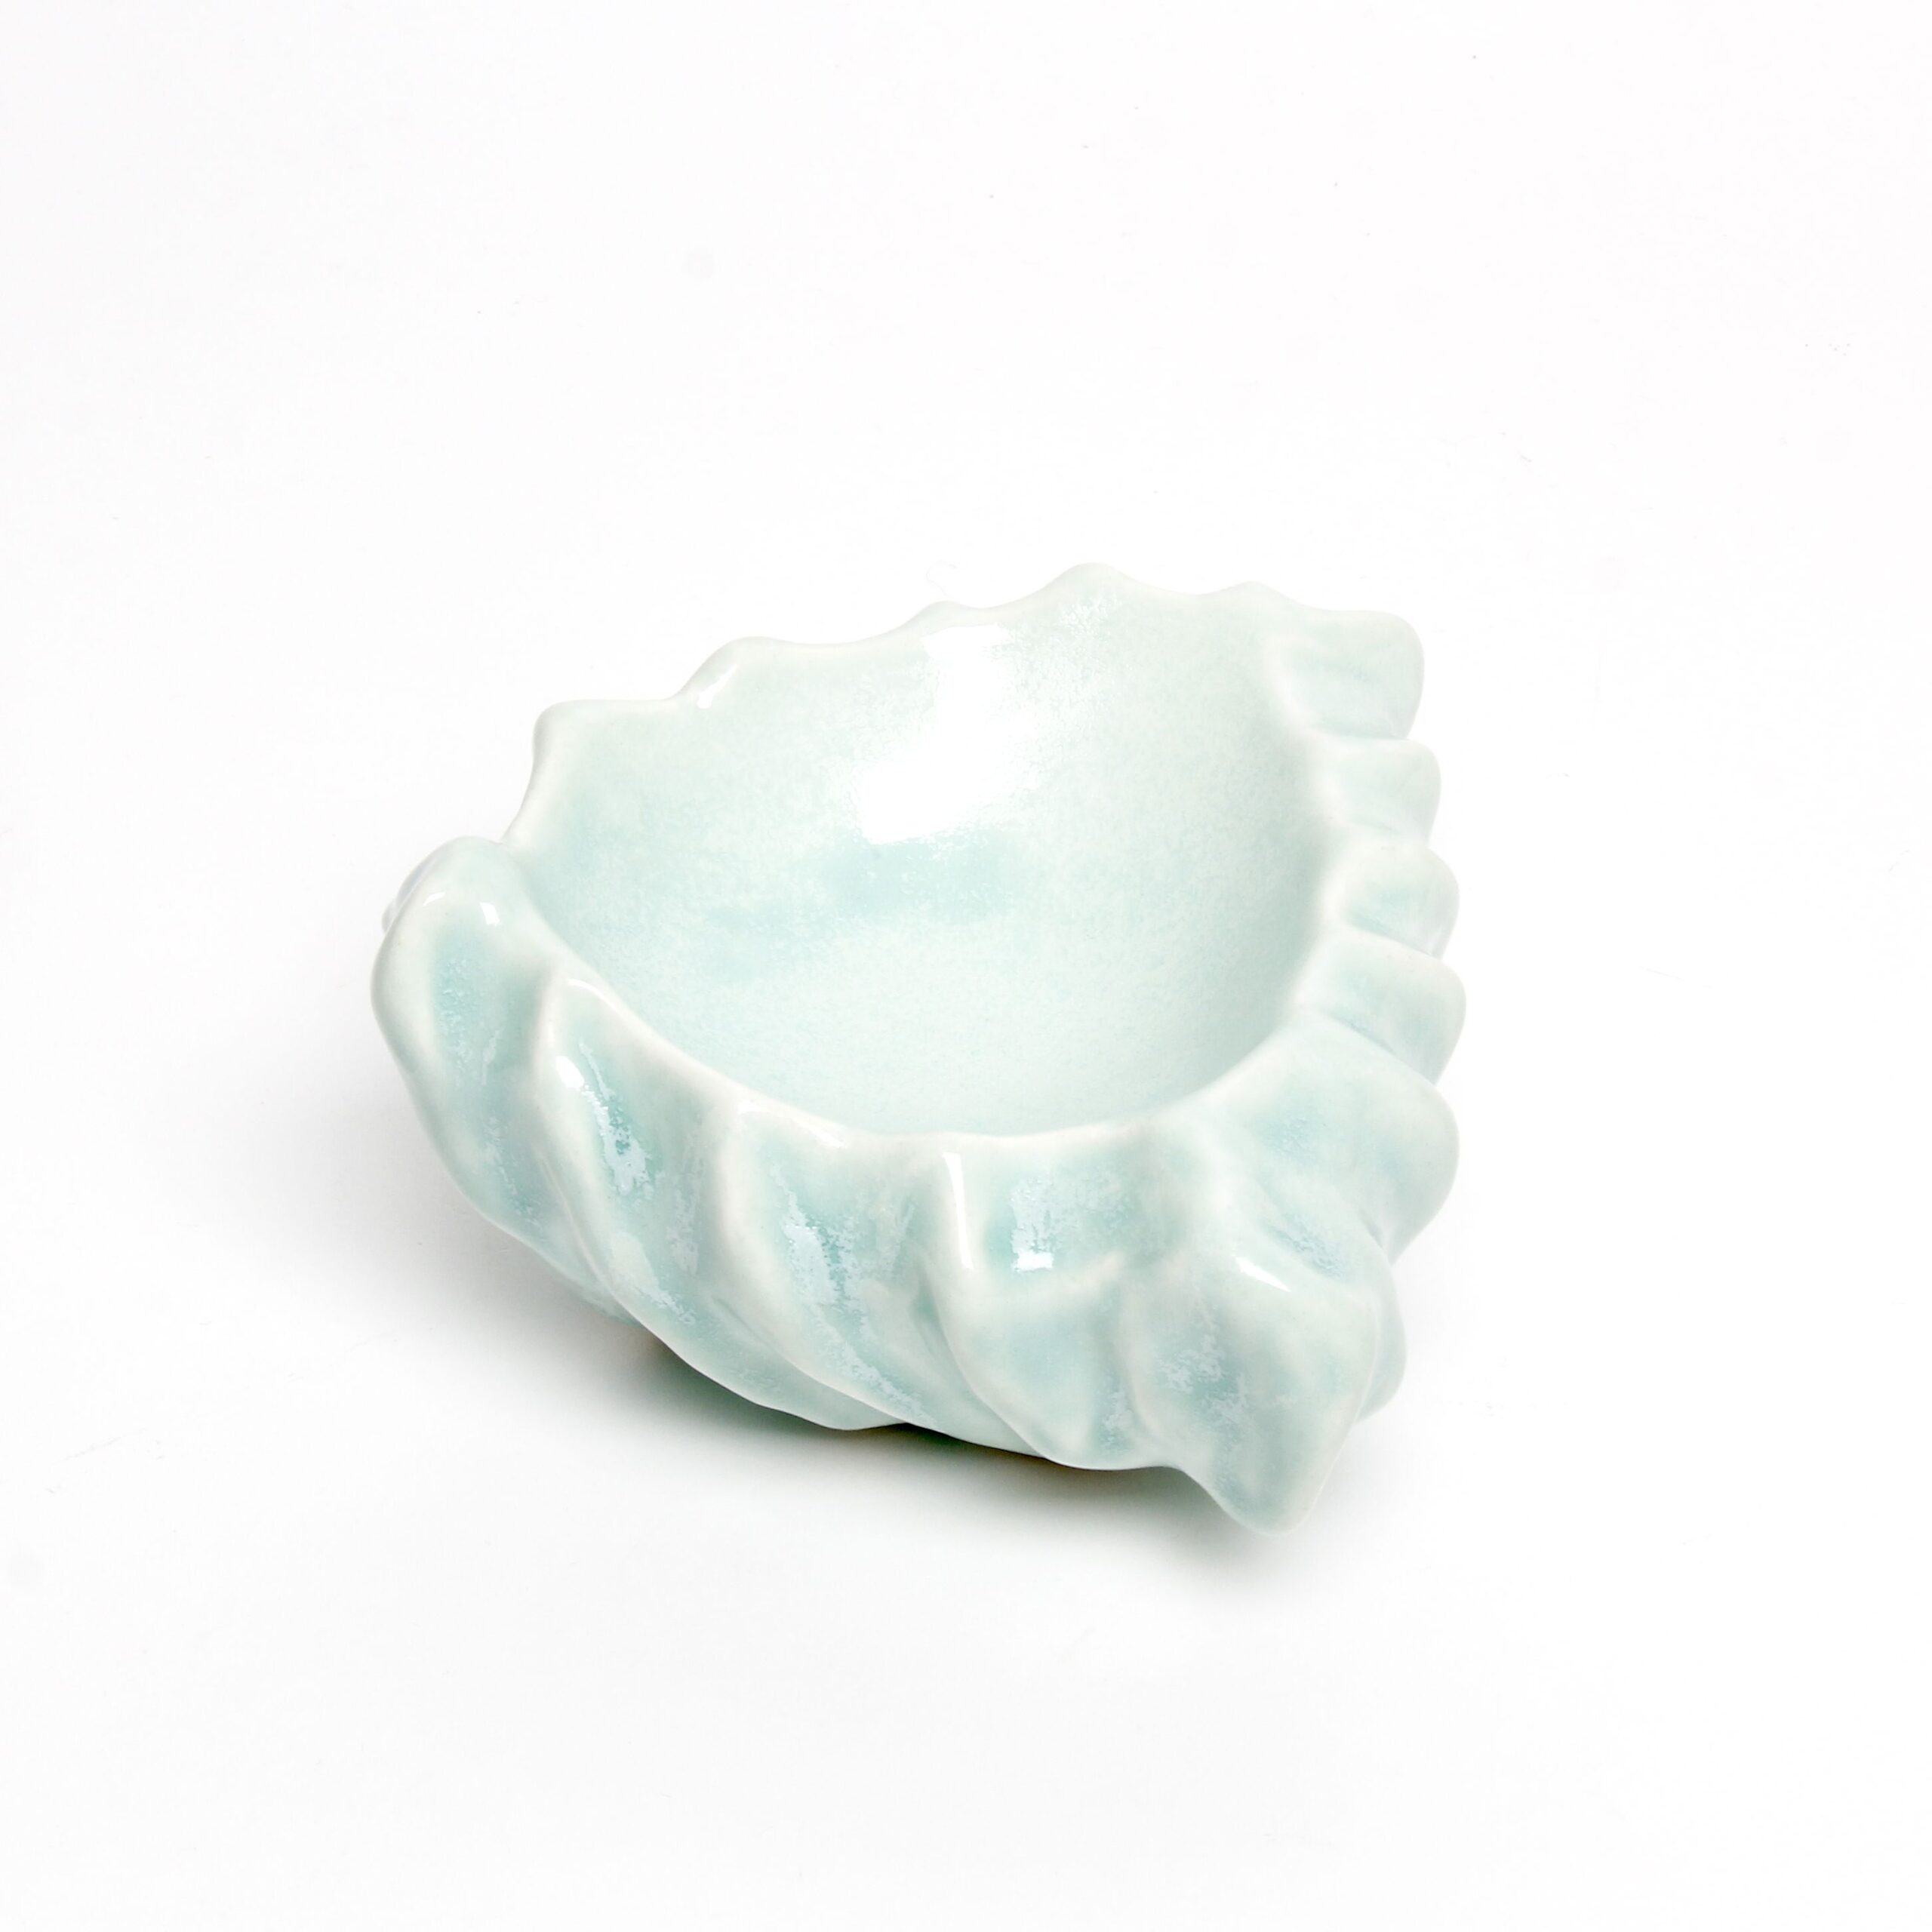 William Lee: Green Triangle Bowl Product Image 3 of 3